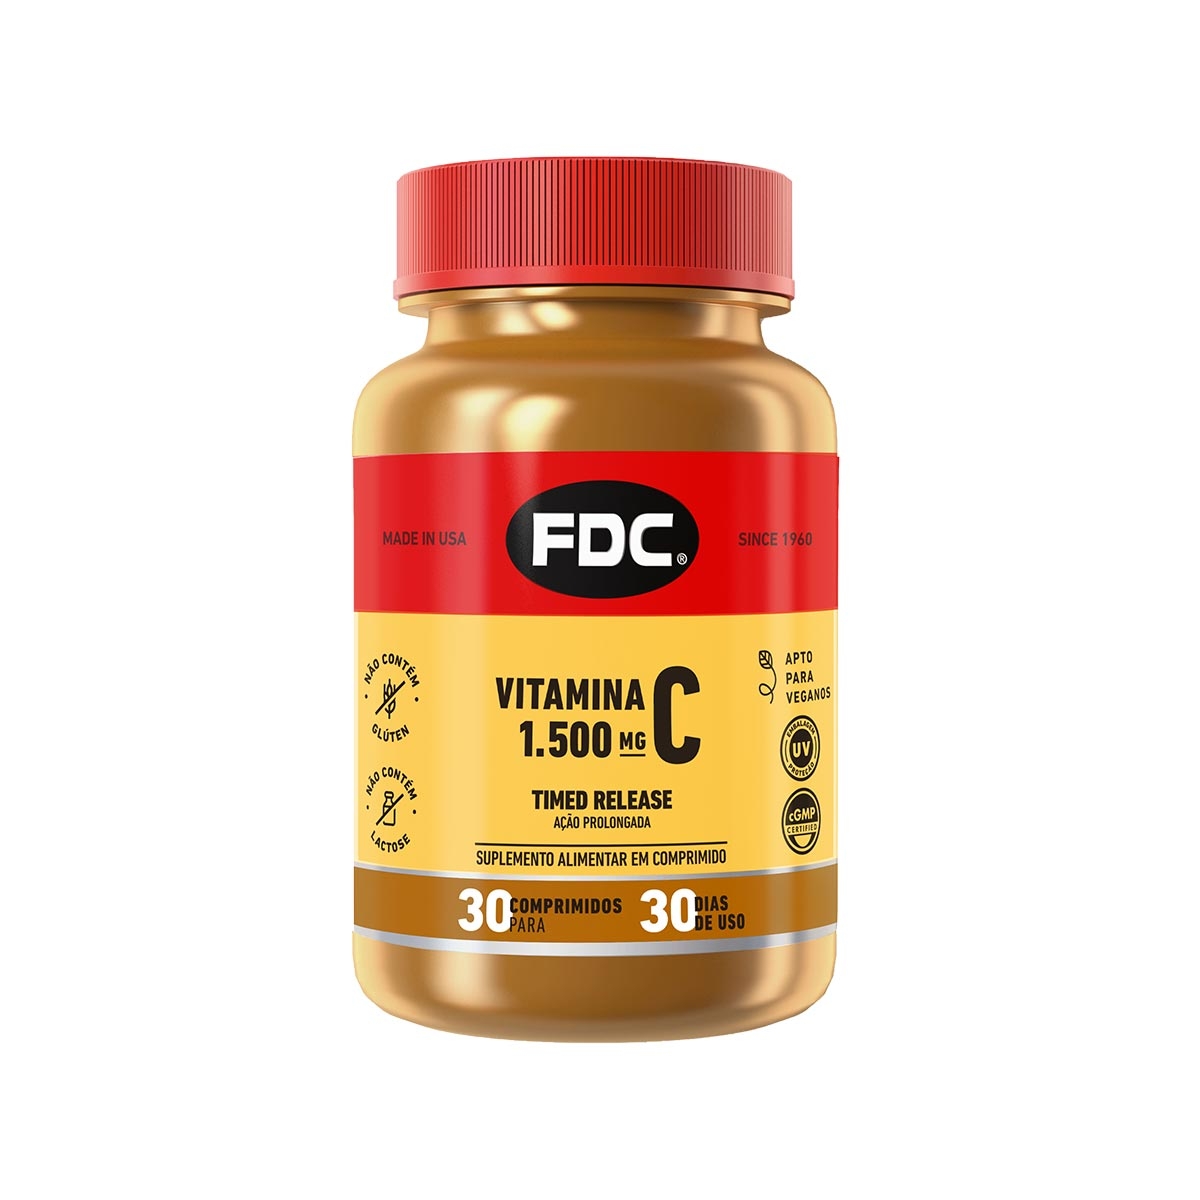 Vitamina C 1500mg Timed Release